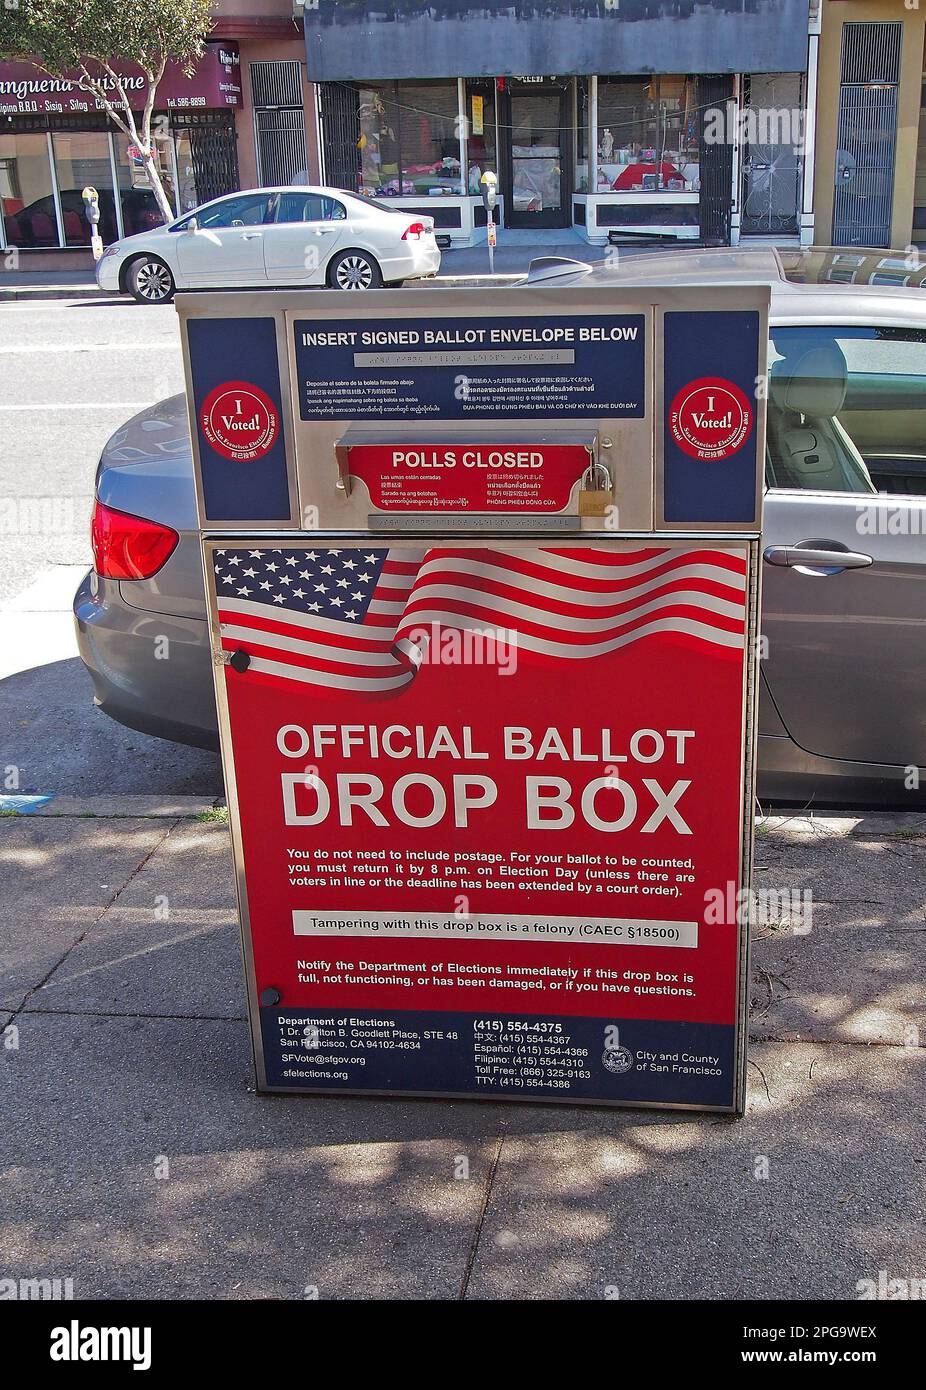 Official Ballot drop box on Mission Street in San Francisco, California Stock Photo